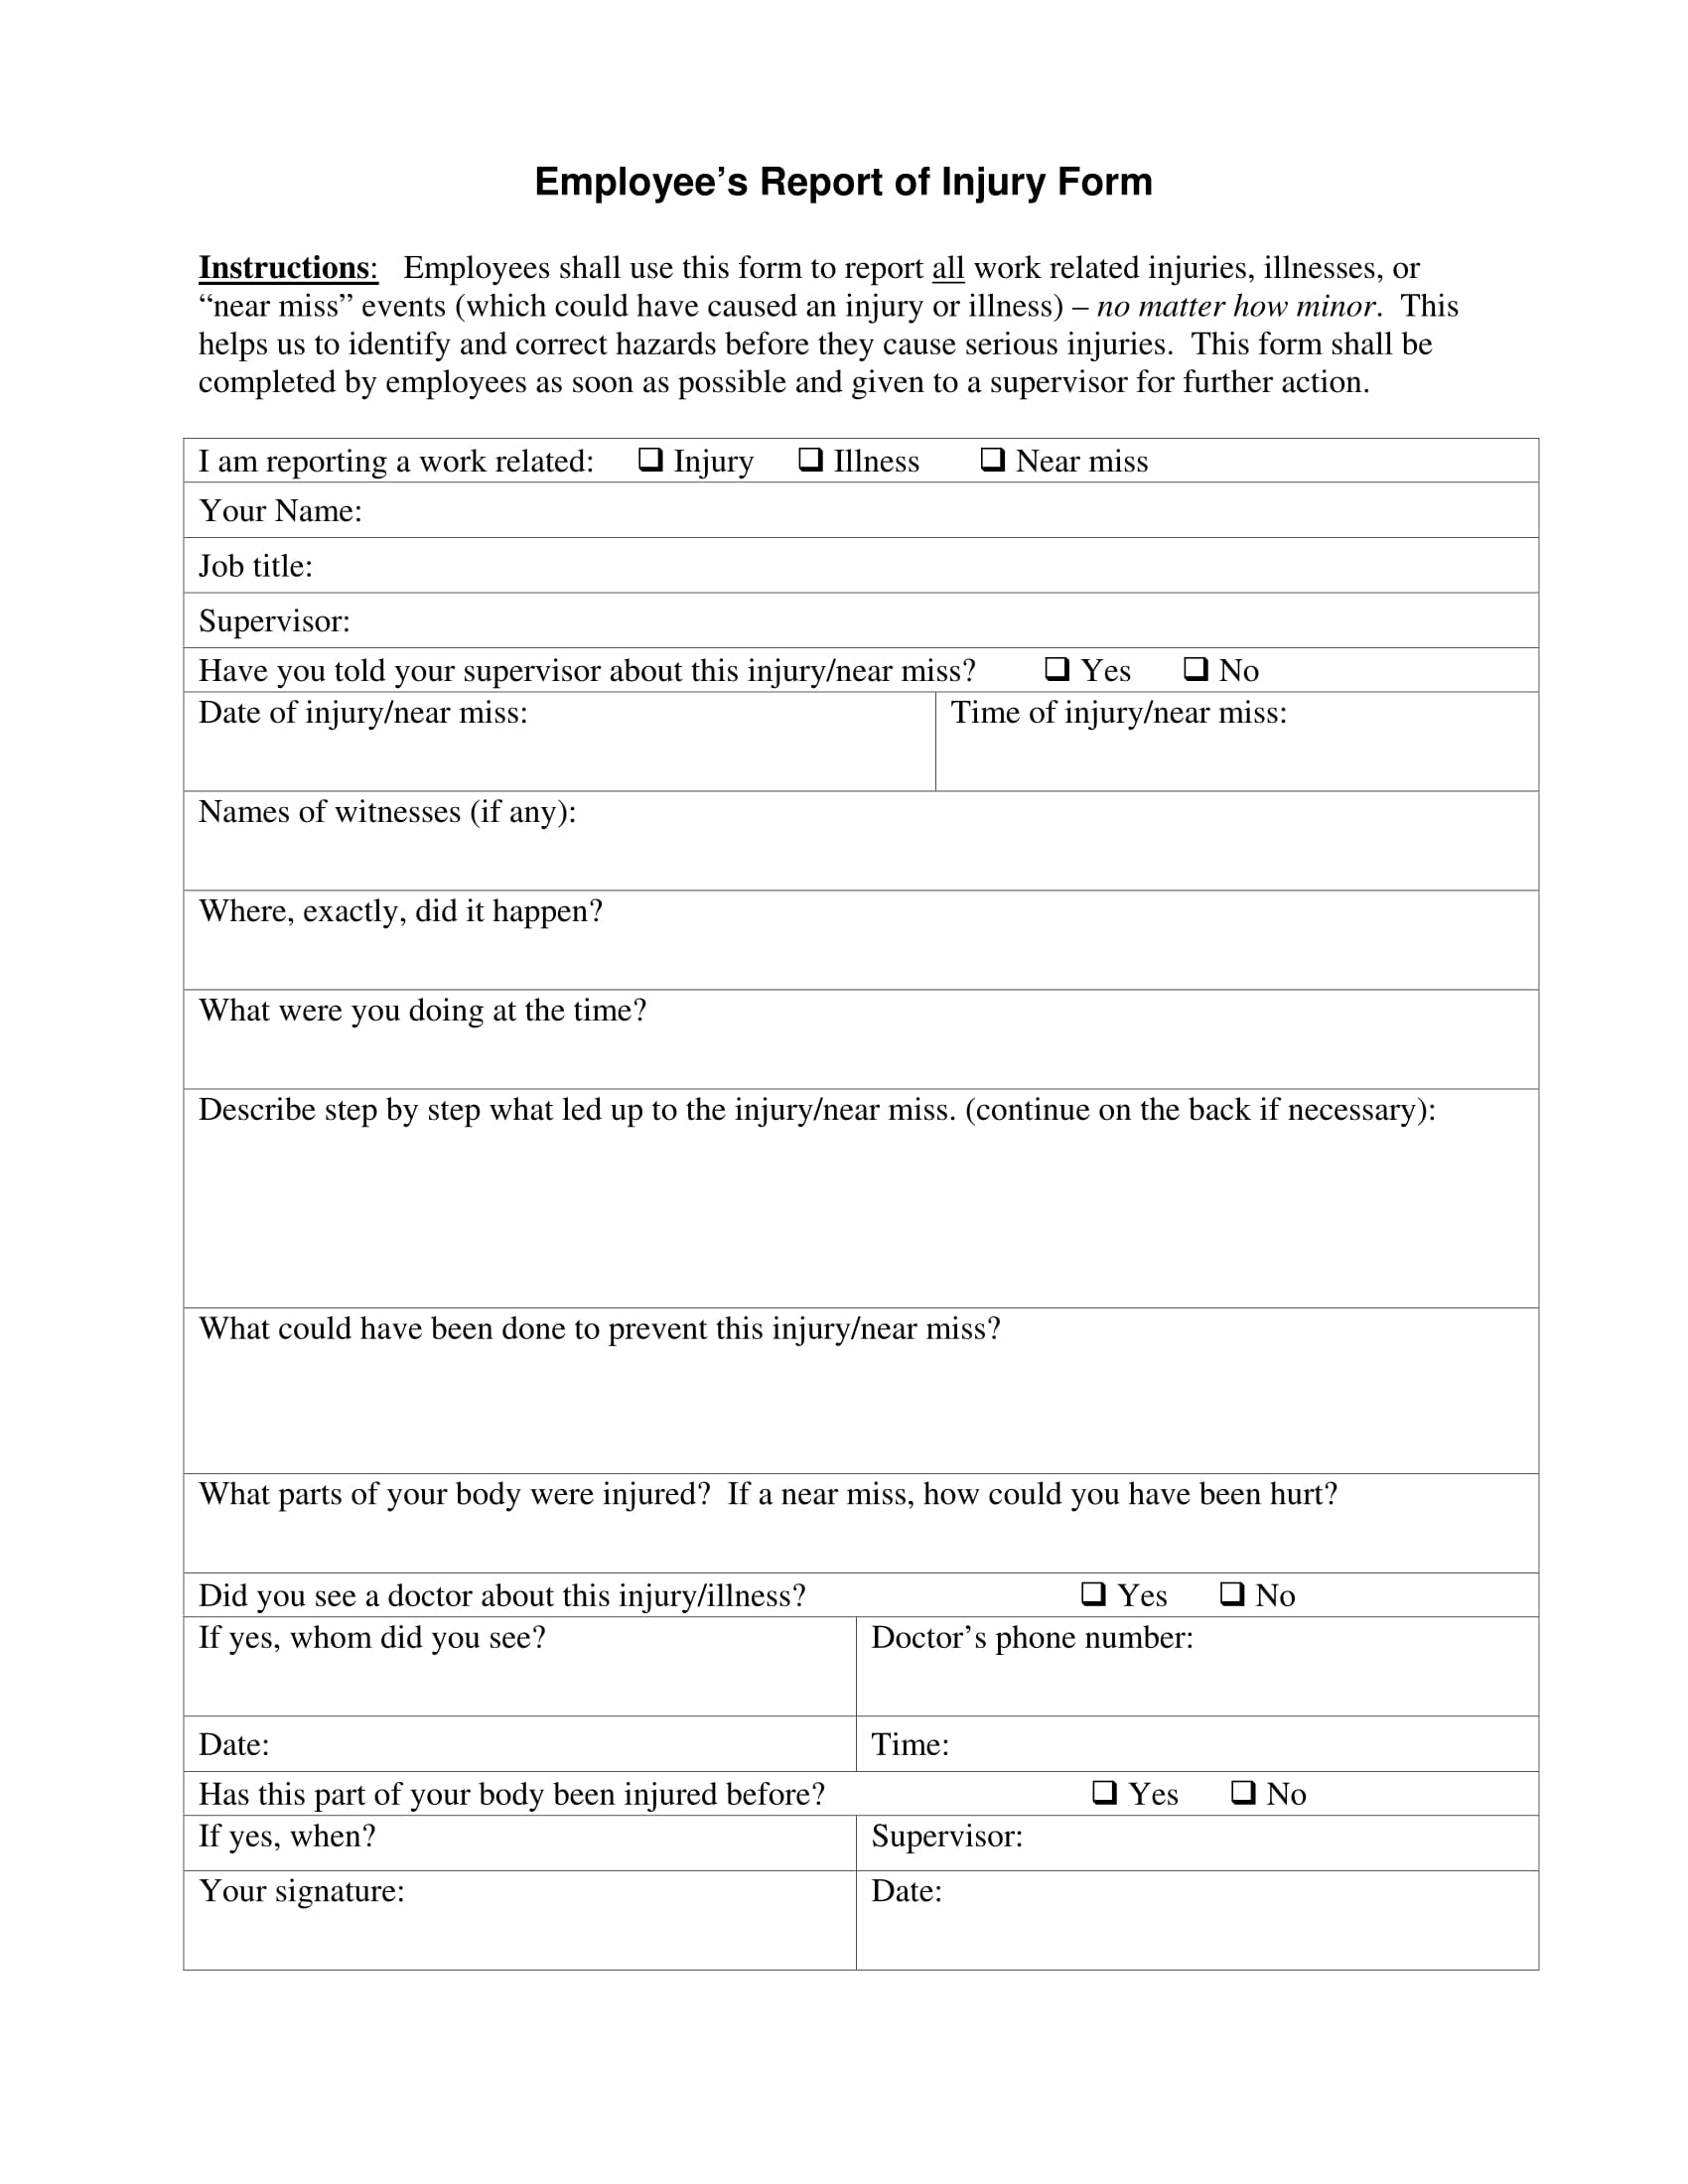 employee’s report of injury form 11